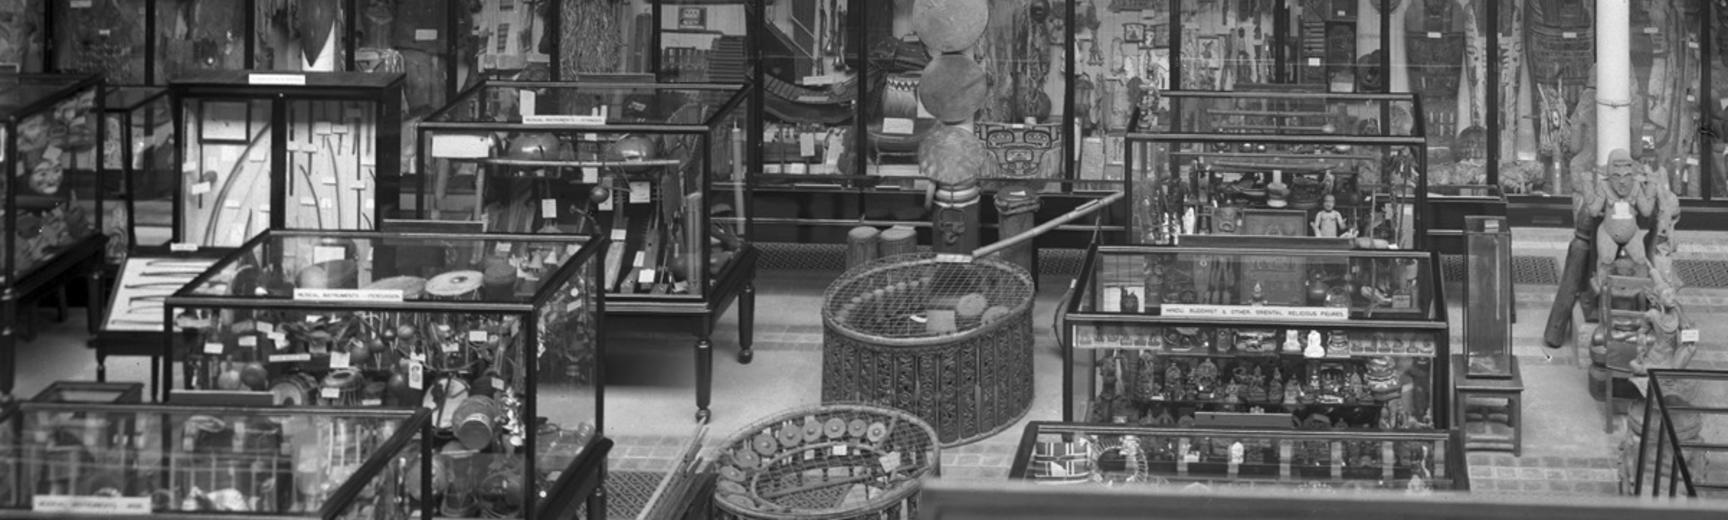 Early view of interior of Pitt Rivers Museum